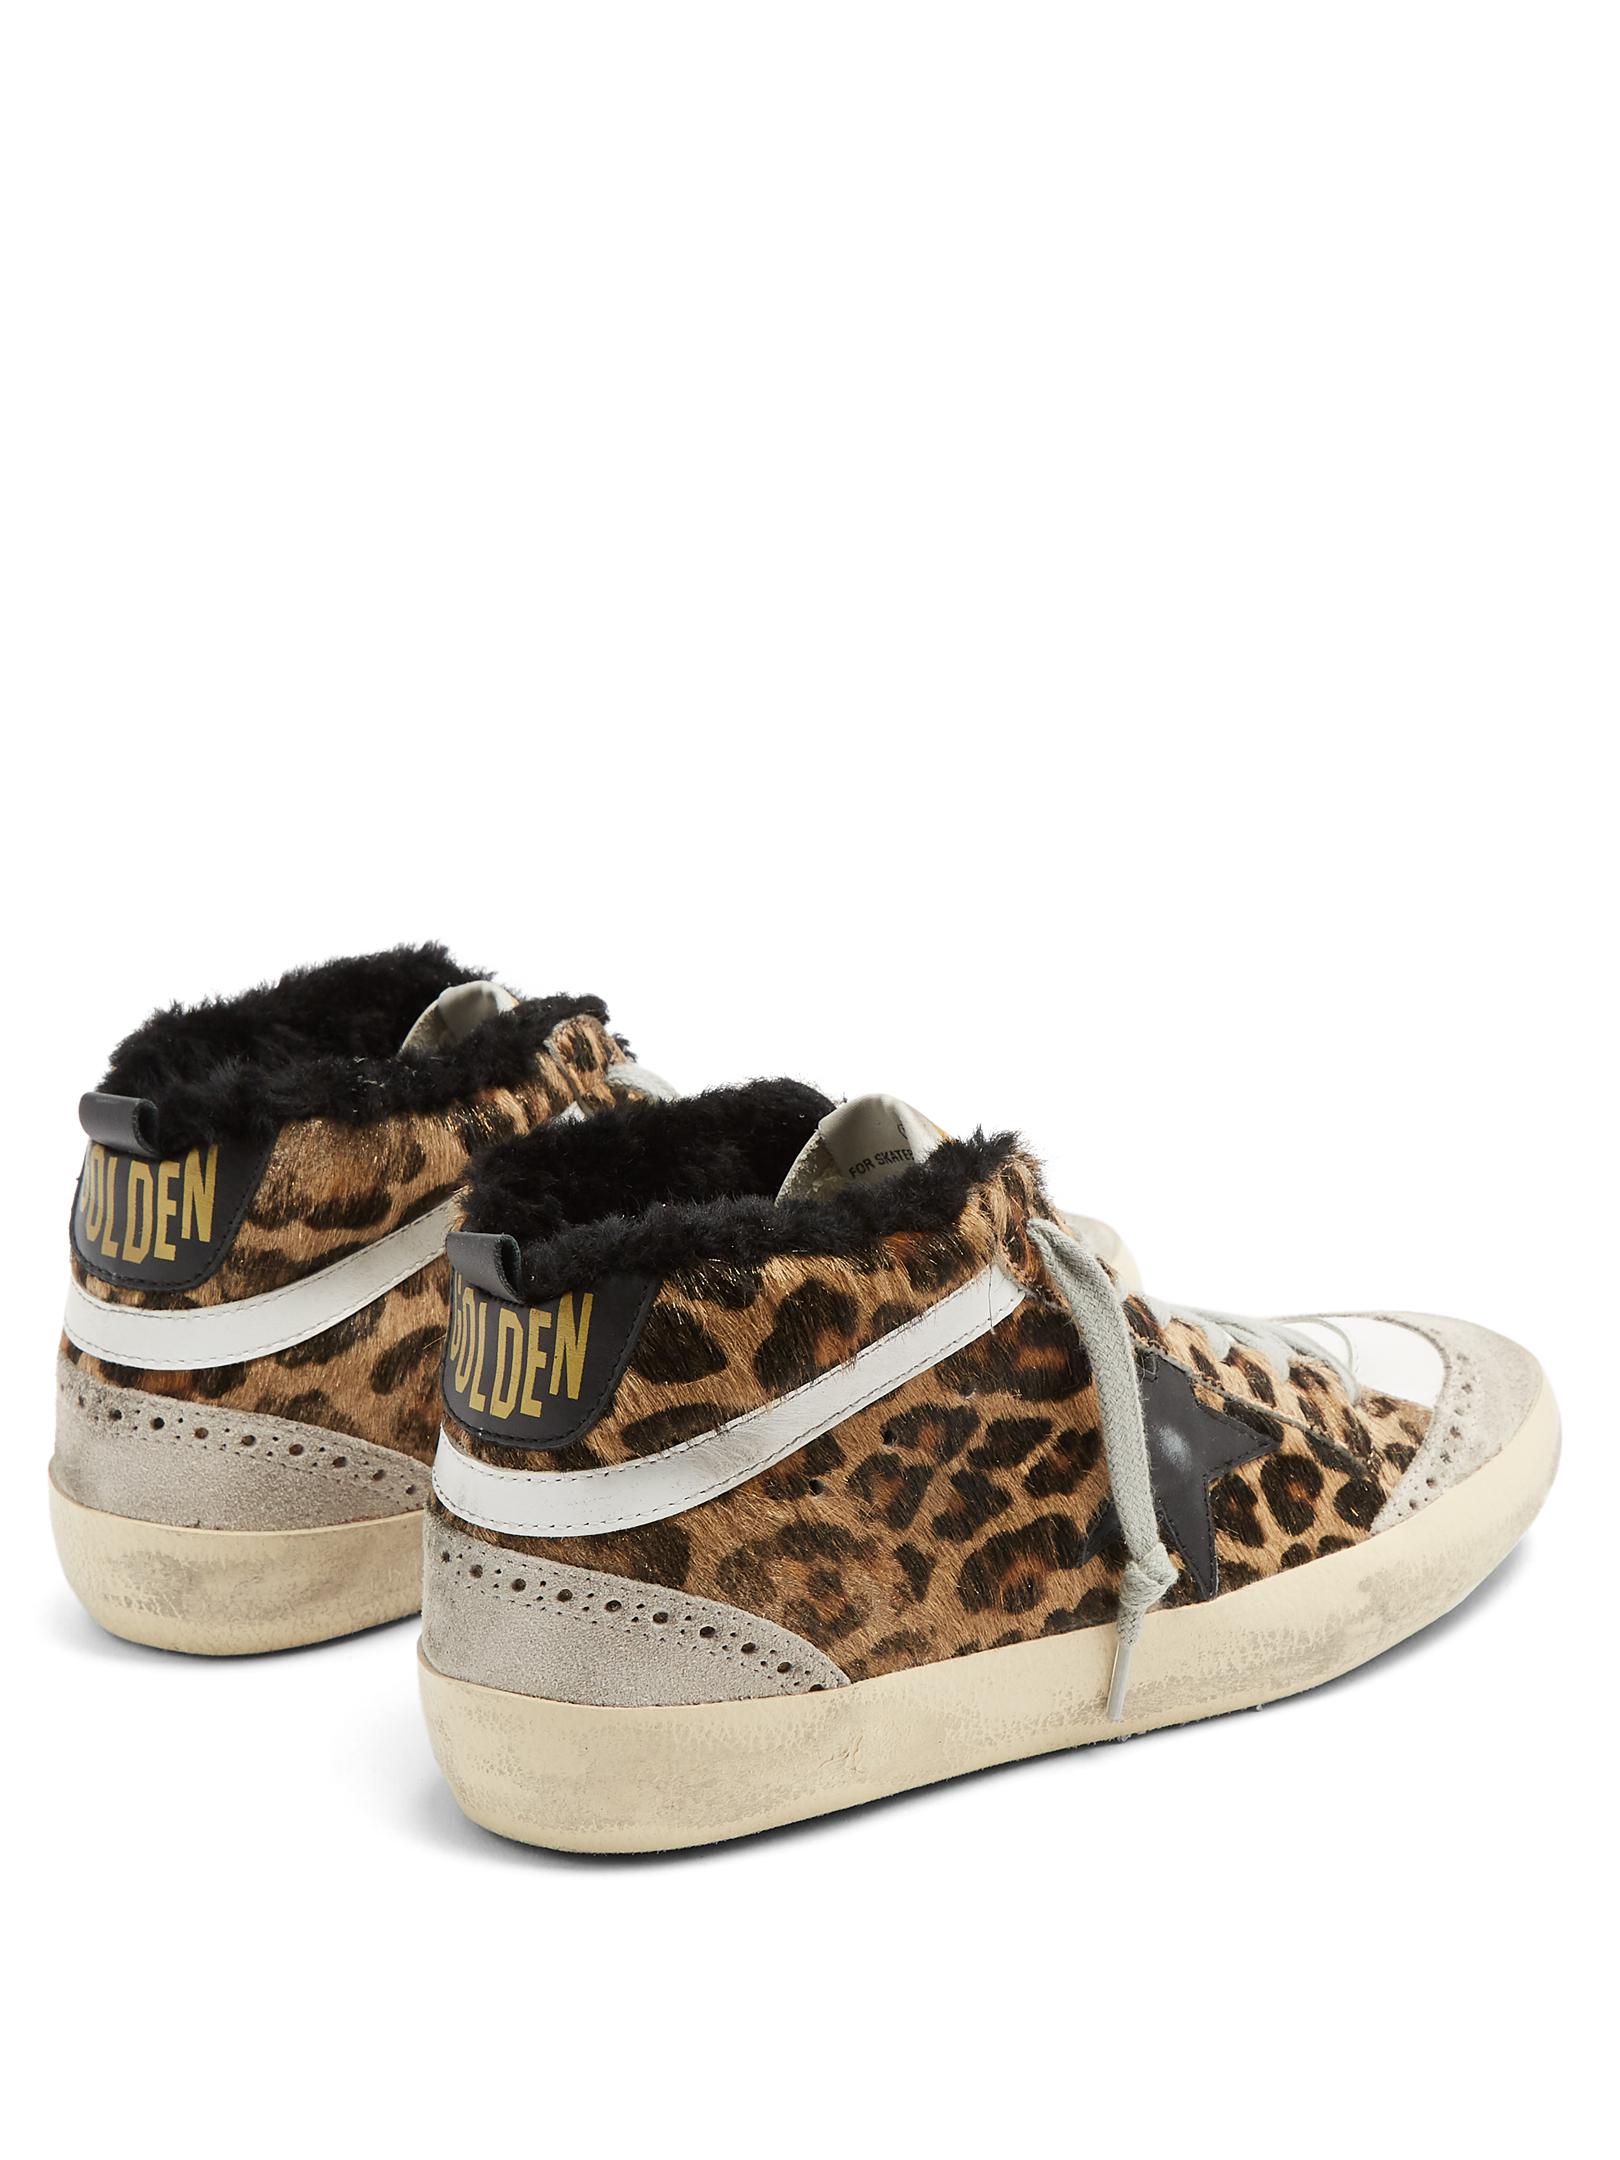 Golden Goose Deluxe Brand Mid Star Leopard-print Shearling-lined ...